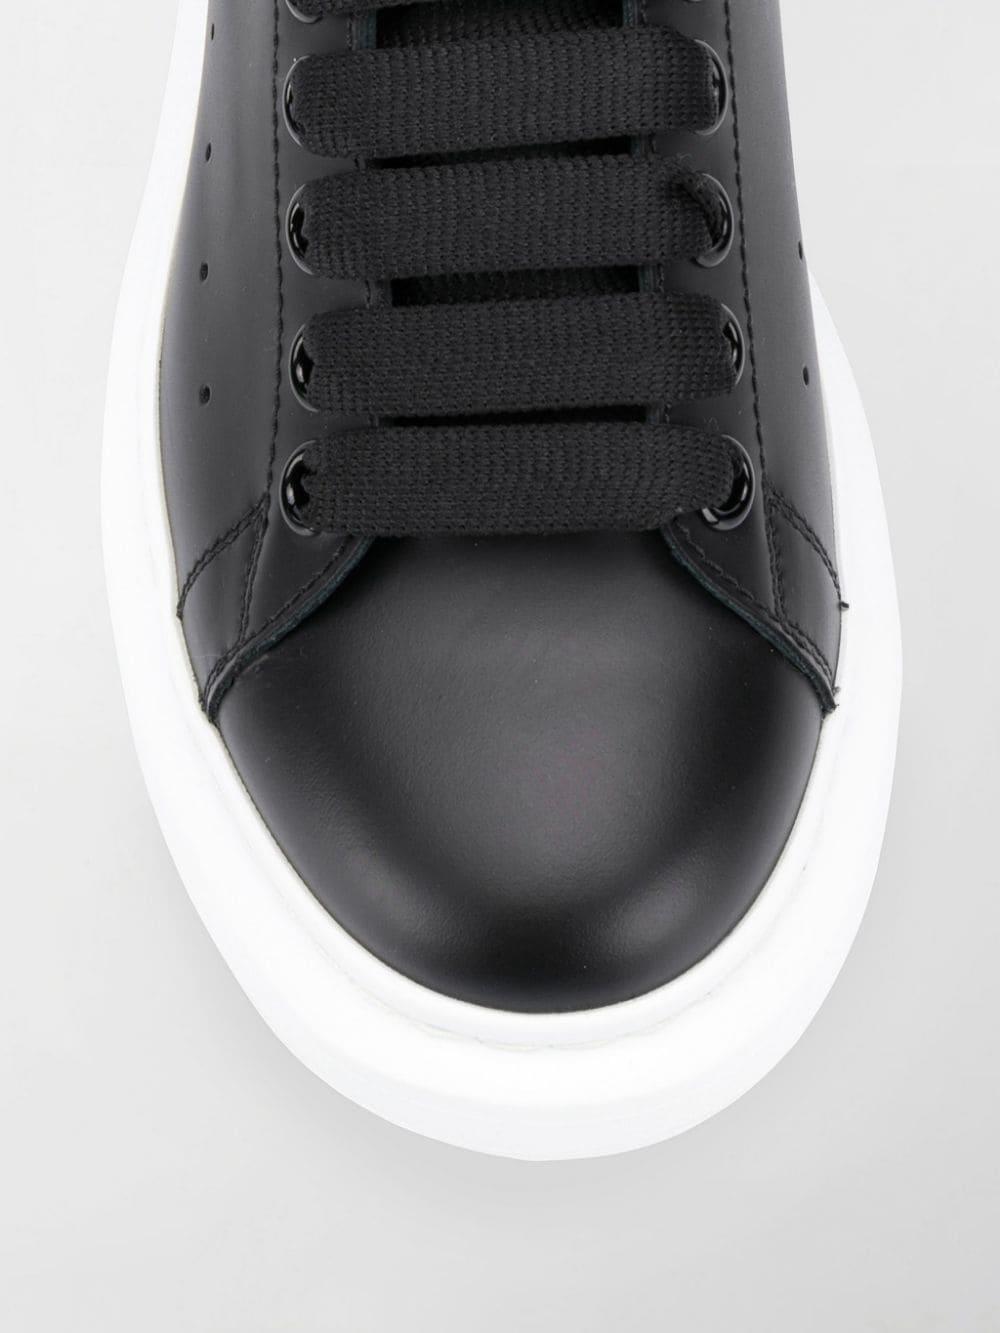 Alexander McQueen Leather Oversized Sole Sneakers Black/white for Men -  Save 39% - Lyst